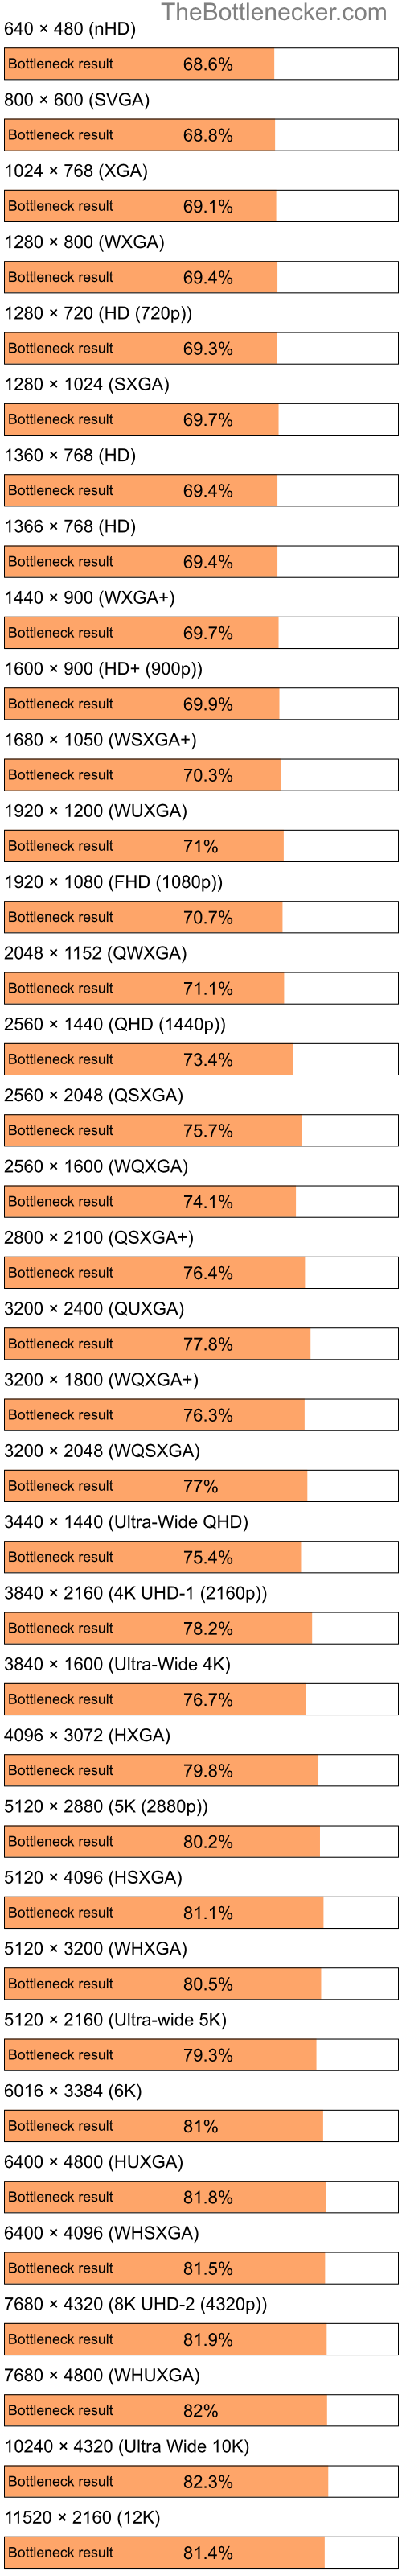 Bottleneck results by resolution for Intel Pentium 4 and NVIDIA GeForce 8300 in Graphic Card Intense Tasks